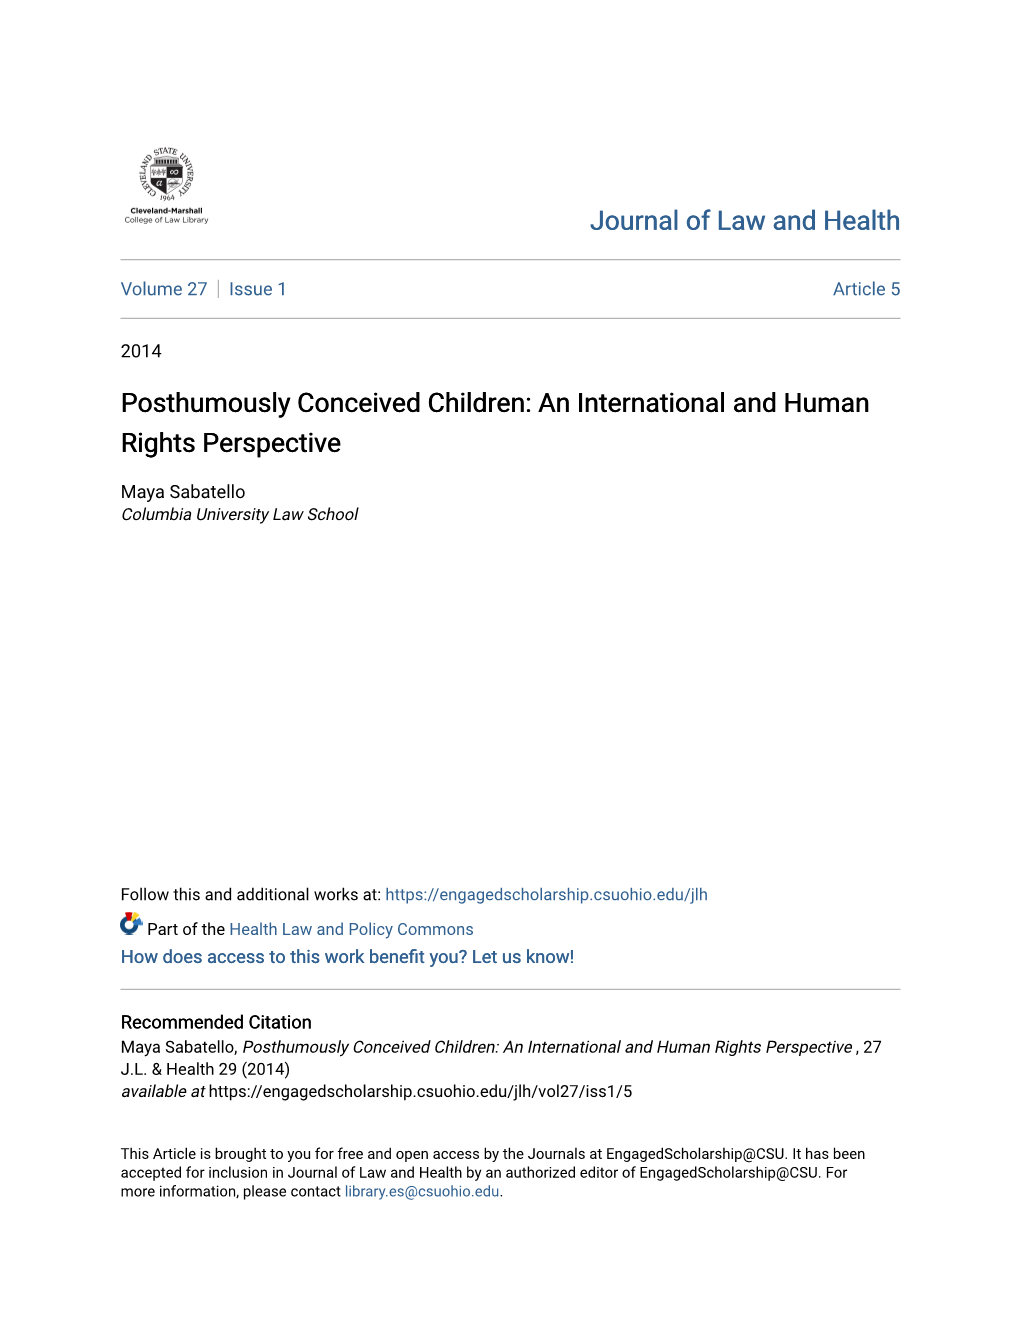 Posthumously Conceived Children: an International and Human Rights Perspective